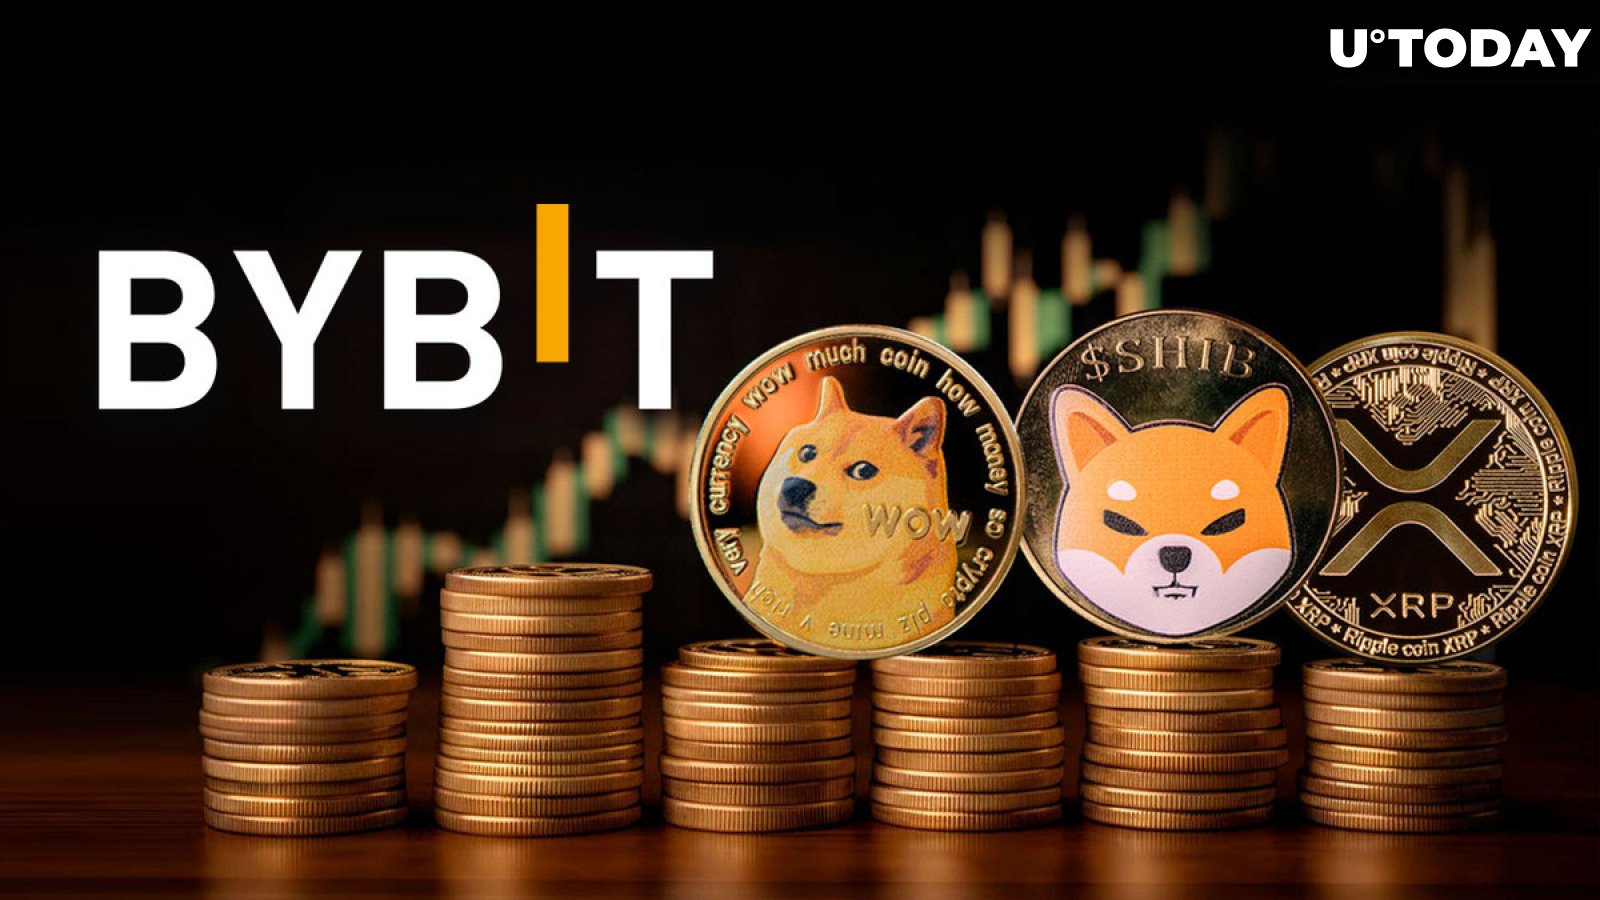 Here is the amount of XRP, DOGE and SHIB held in Bybit reserves on the major exchange